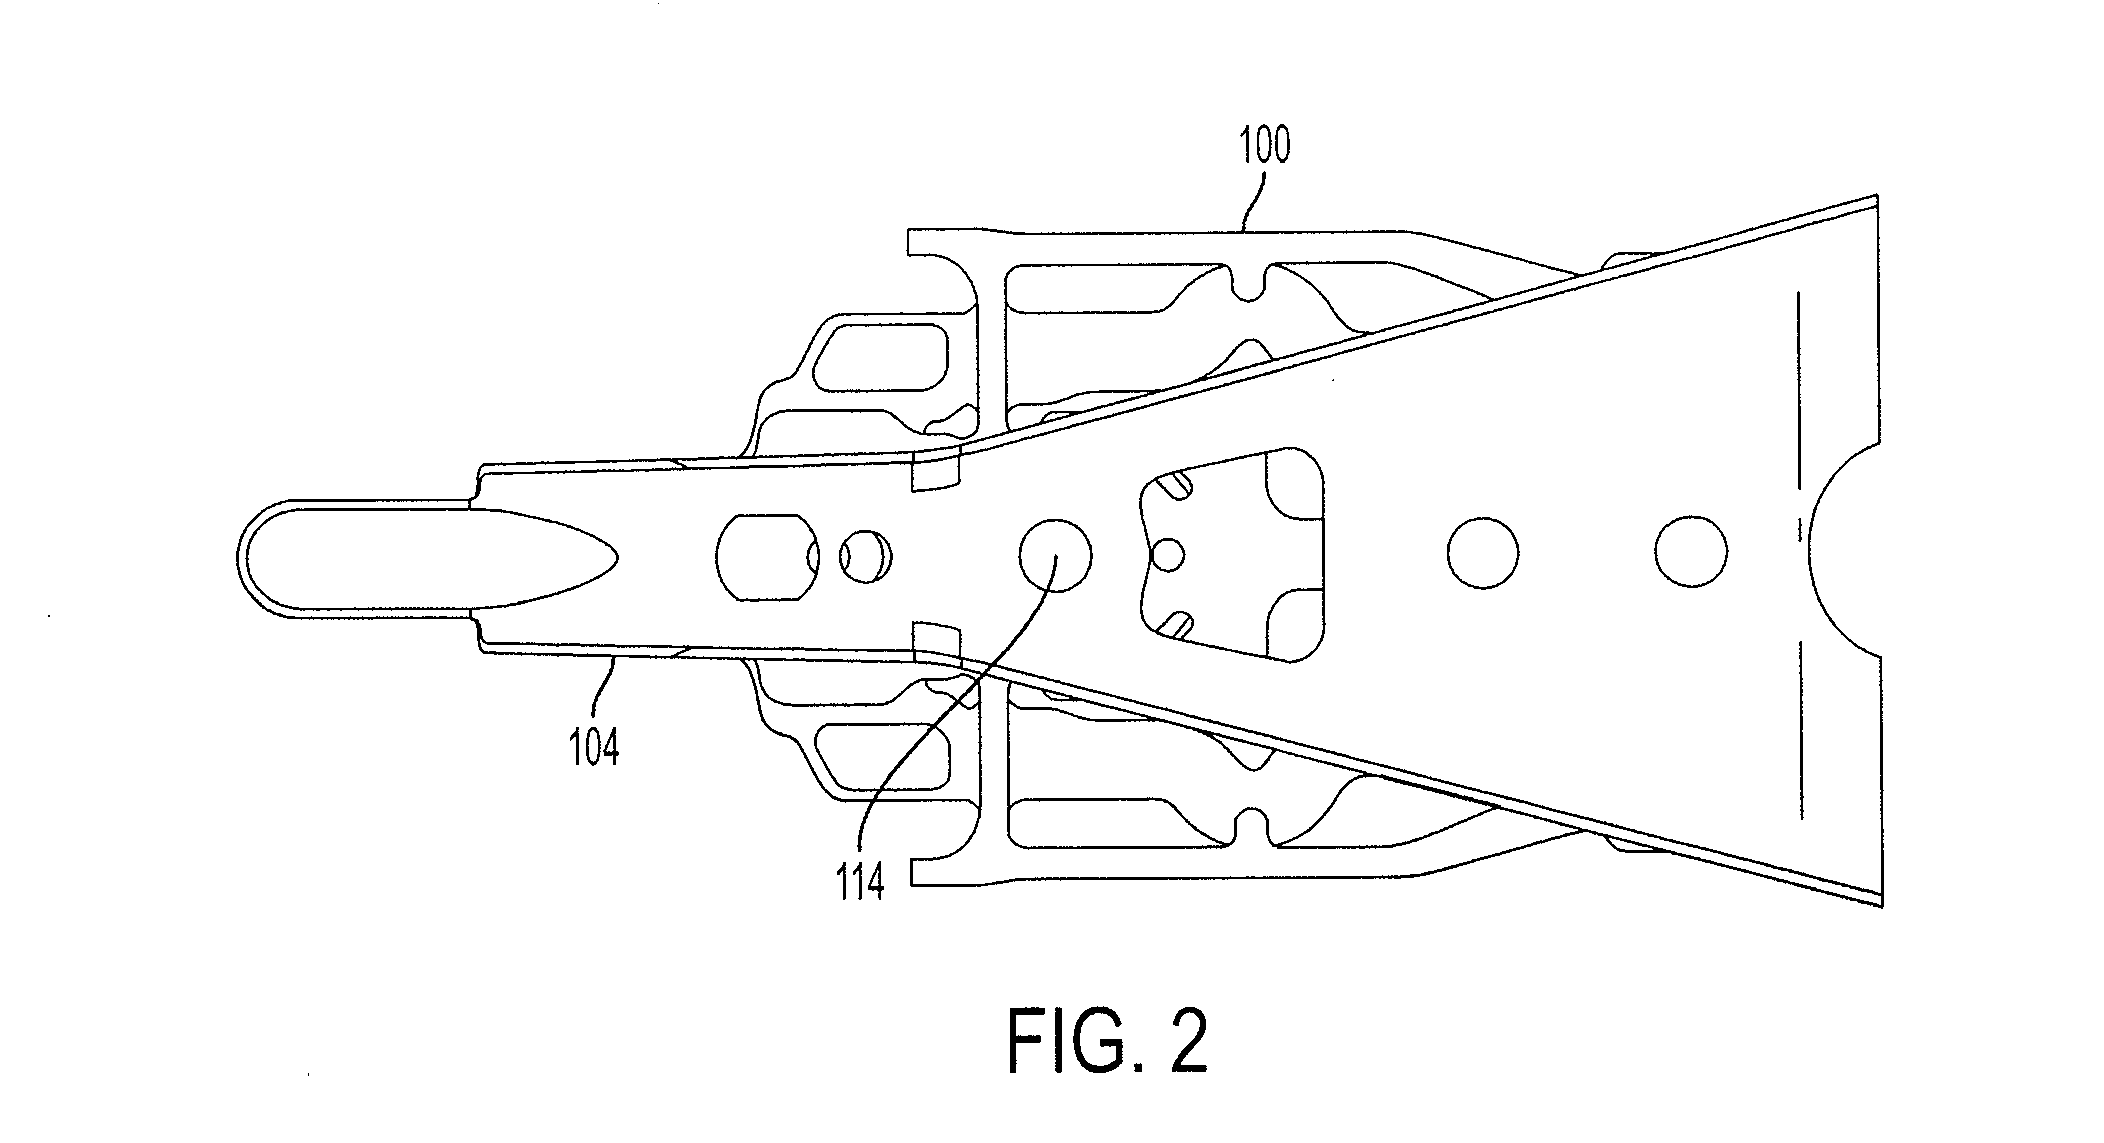 Head gimbal assembly with diamond-like coating (DLC) at tongue/dimple interface to reduce friction and fretting wear